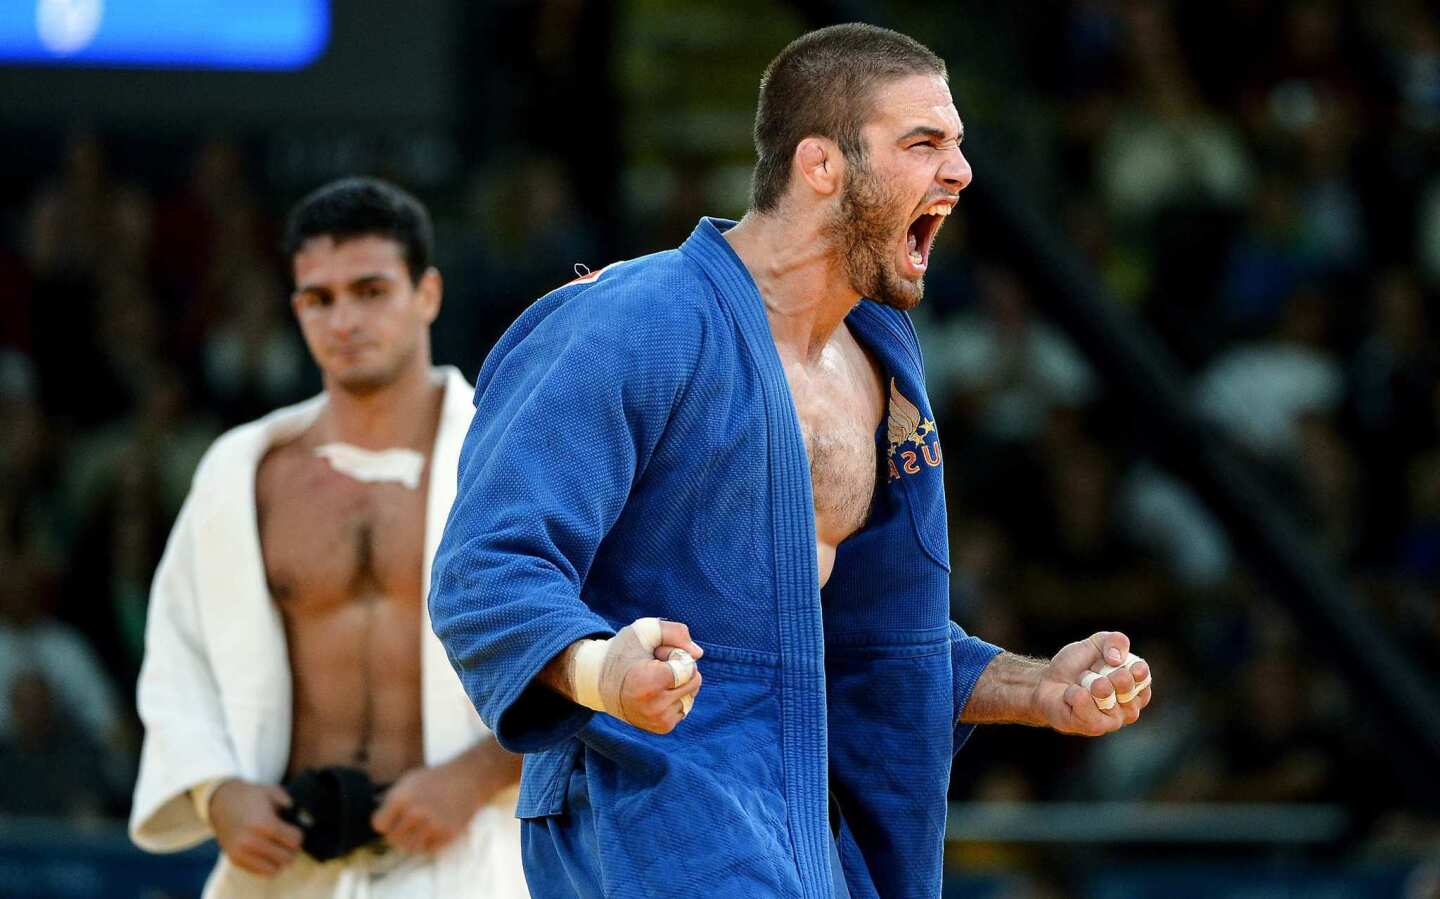 Travis Stevens celebrates after defeating Brazil's Leandro Guilheiro, the top seed, to advance to the semifinals in the 81kg judo competition. Stevens went on to lose in the bronze medal match.